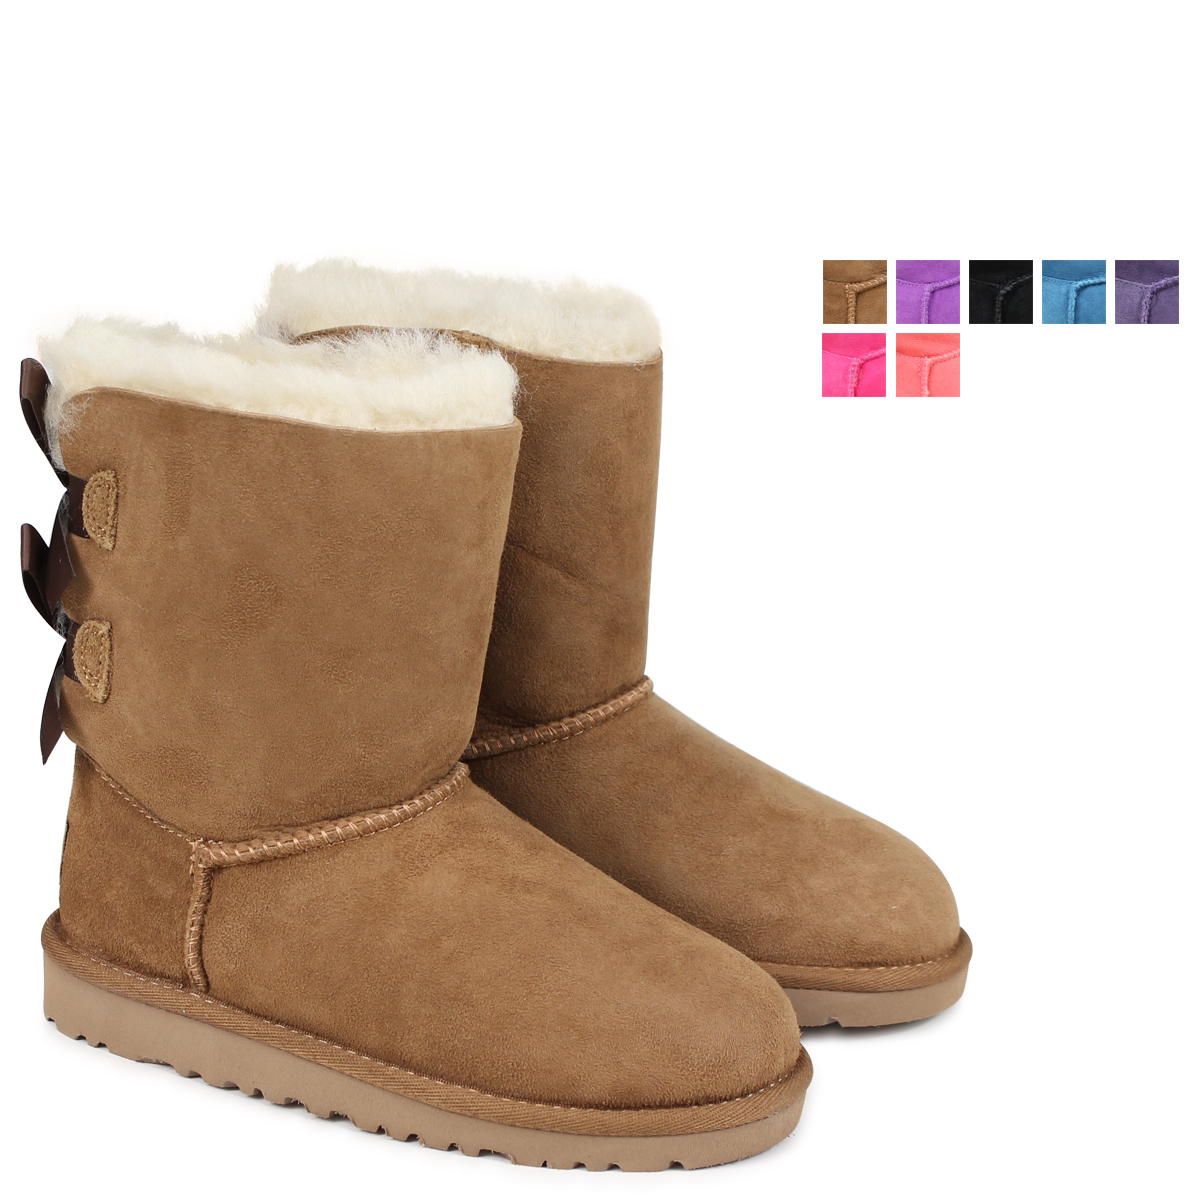 where to purchase uggs